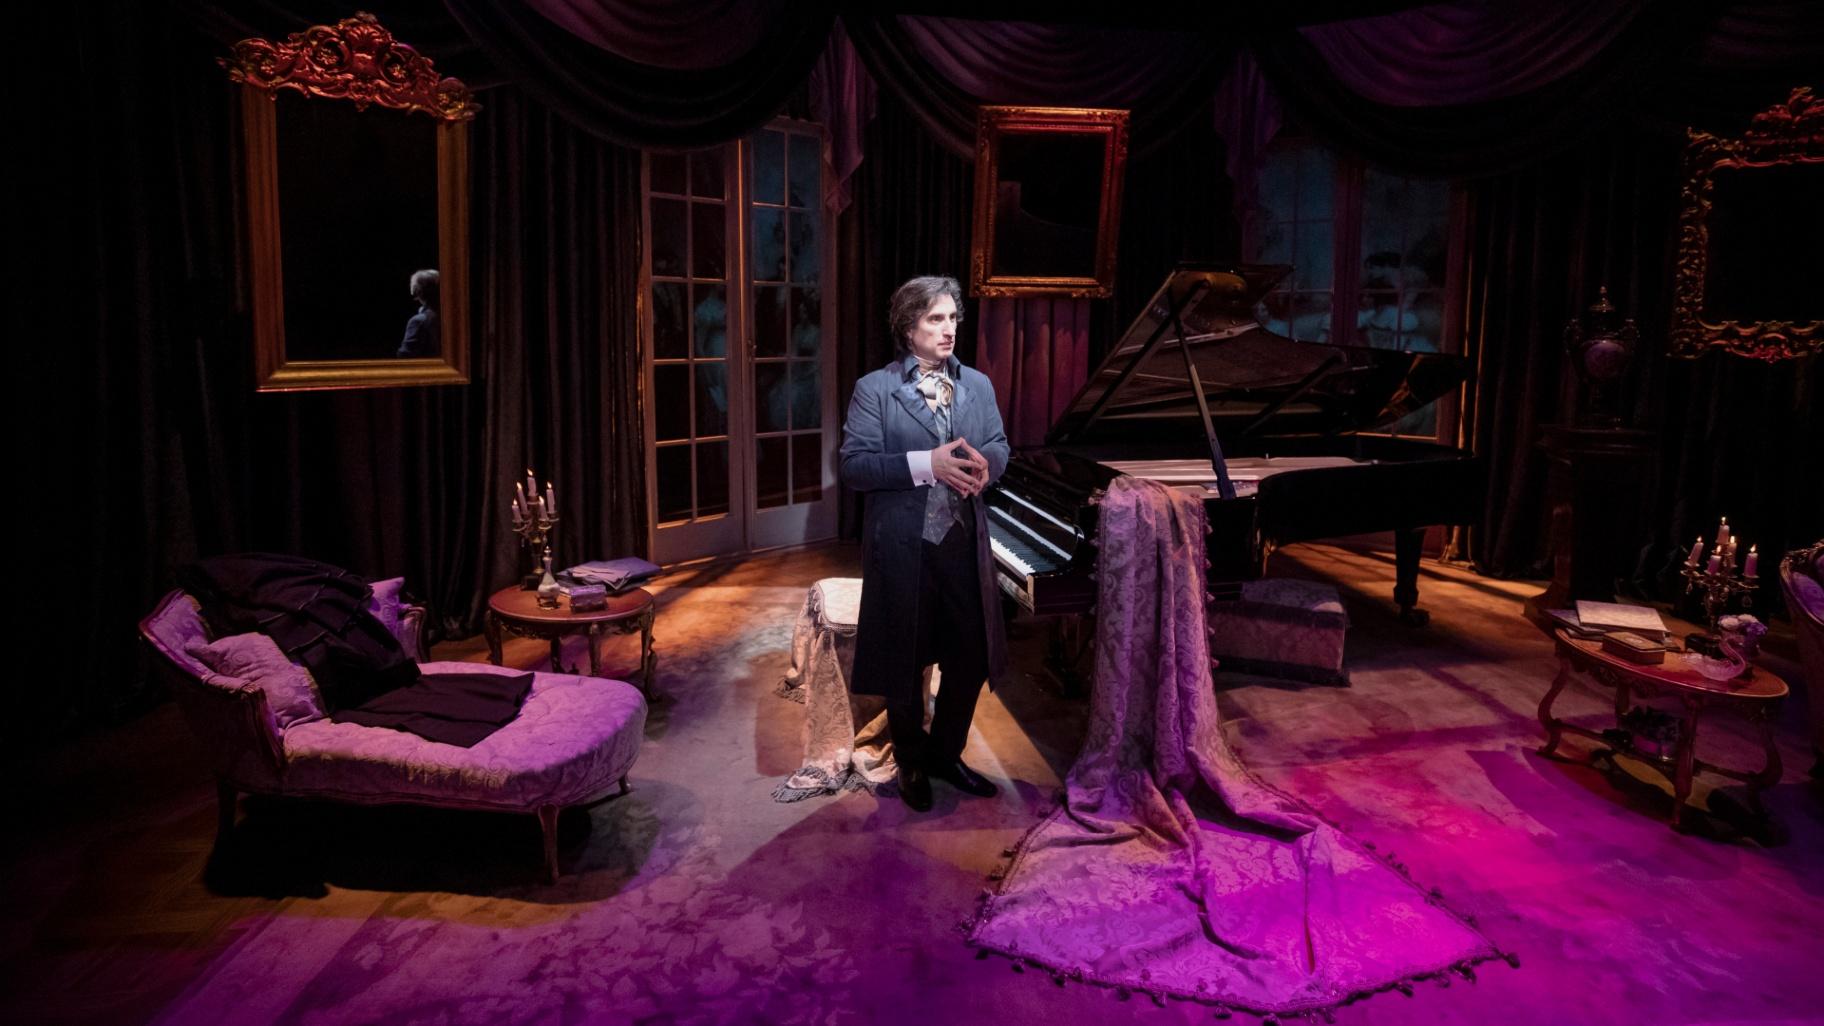 Hershey Felder in “Monsieur Chopin, A Play With Music.” The show runs at Writers Theatre in Glencoe through May 12. (Courtesy of Hershey Felder)